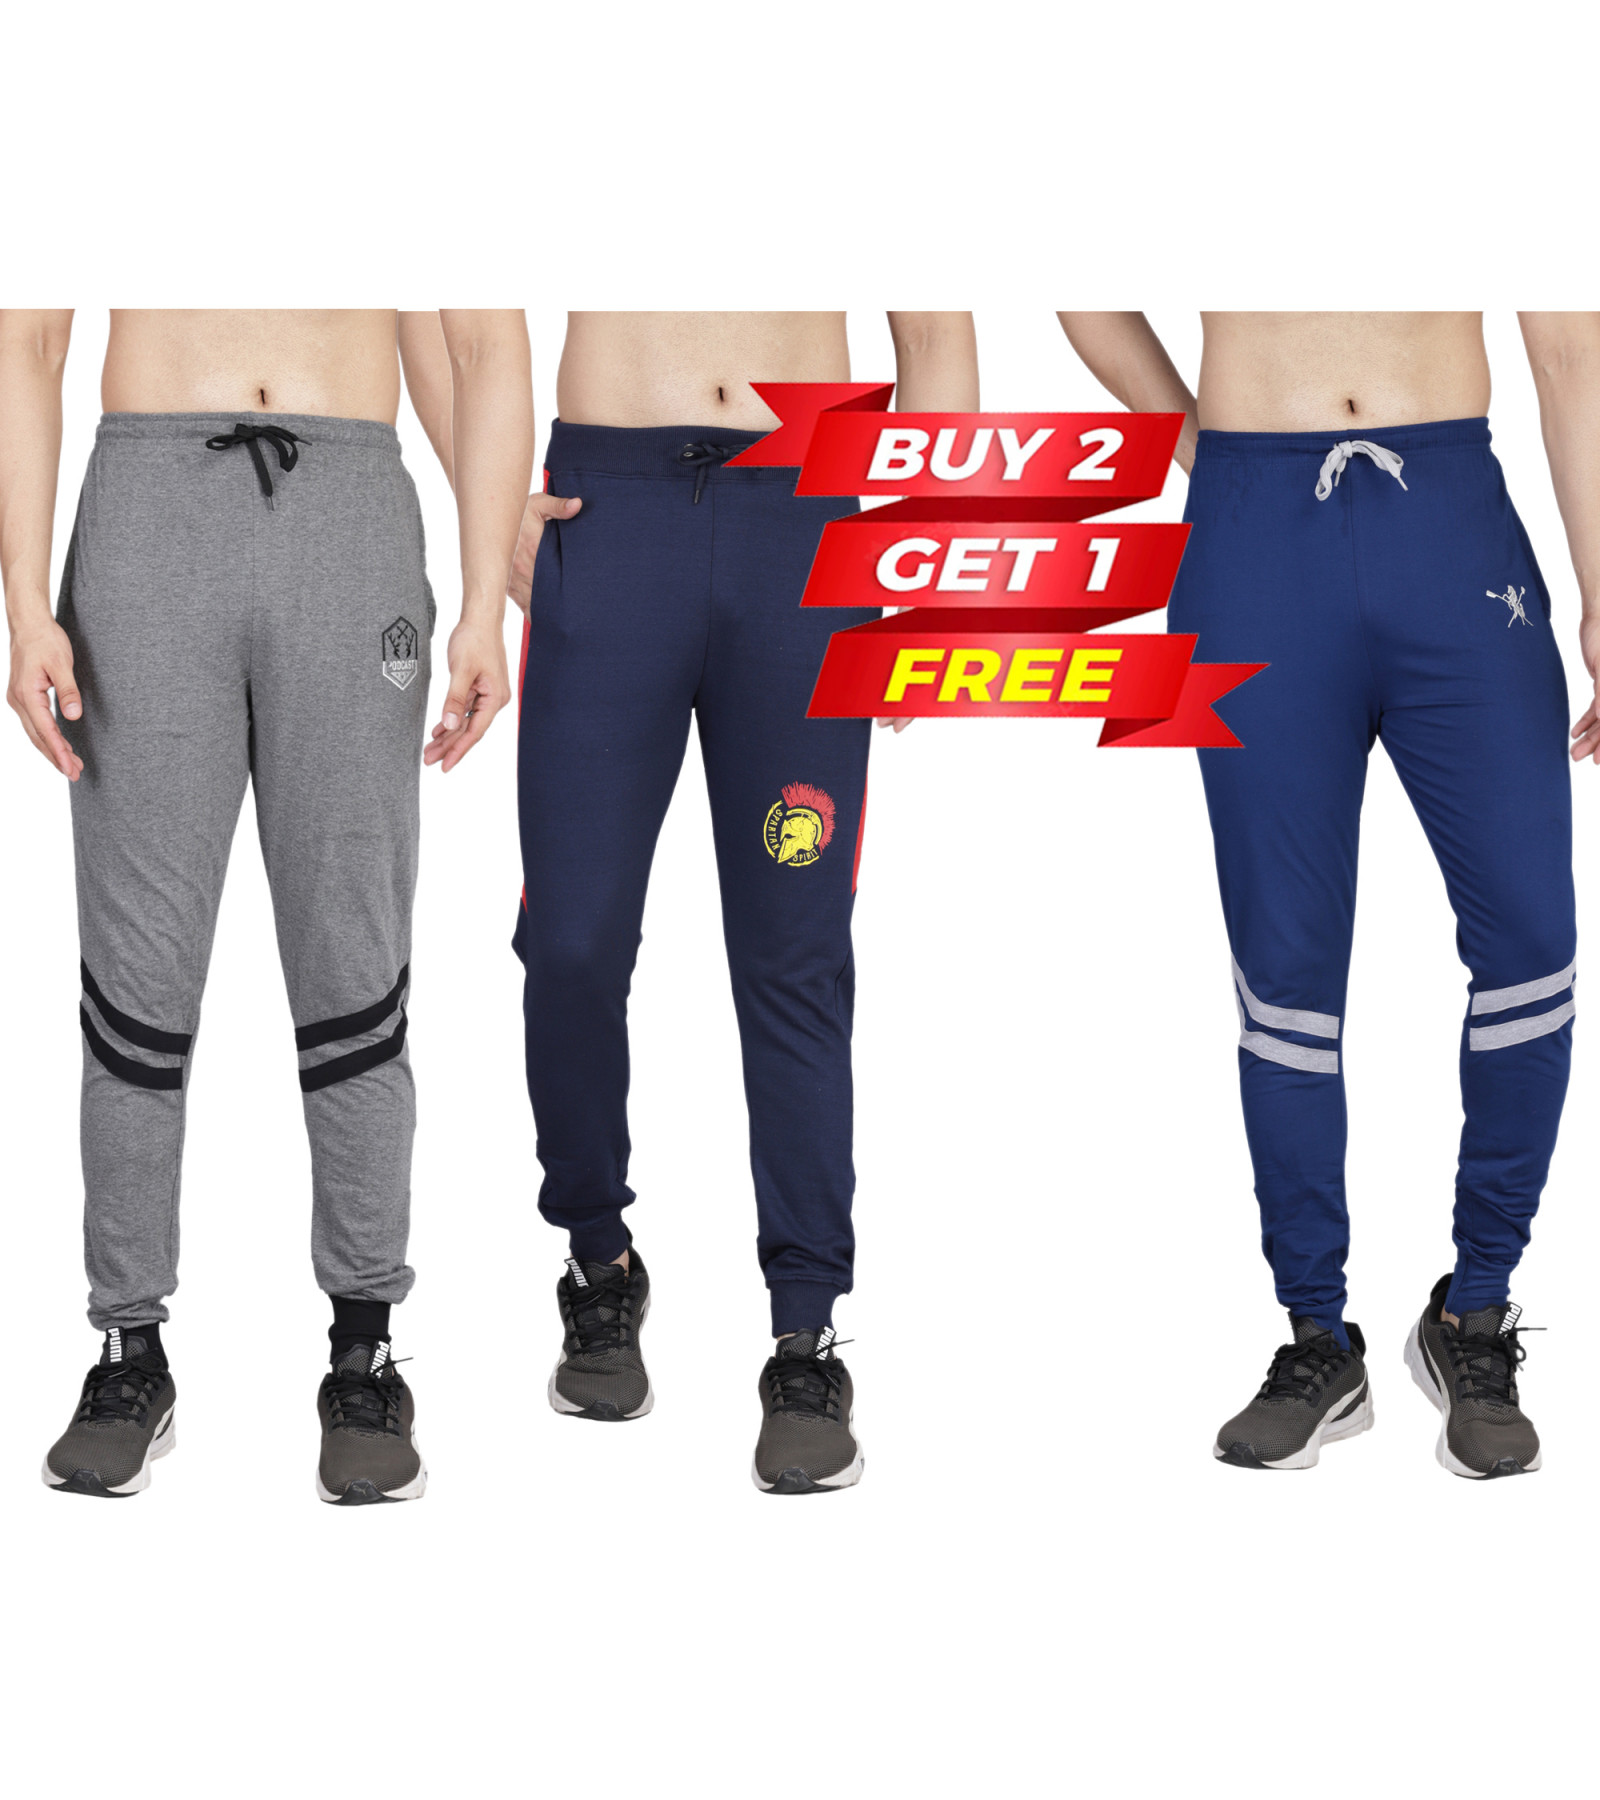 Mens Track Pant Buy 2 Get 1 Free Combo Offer